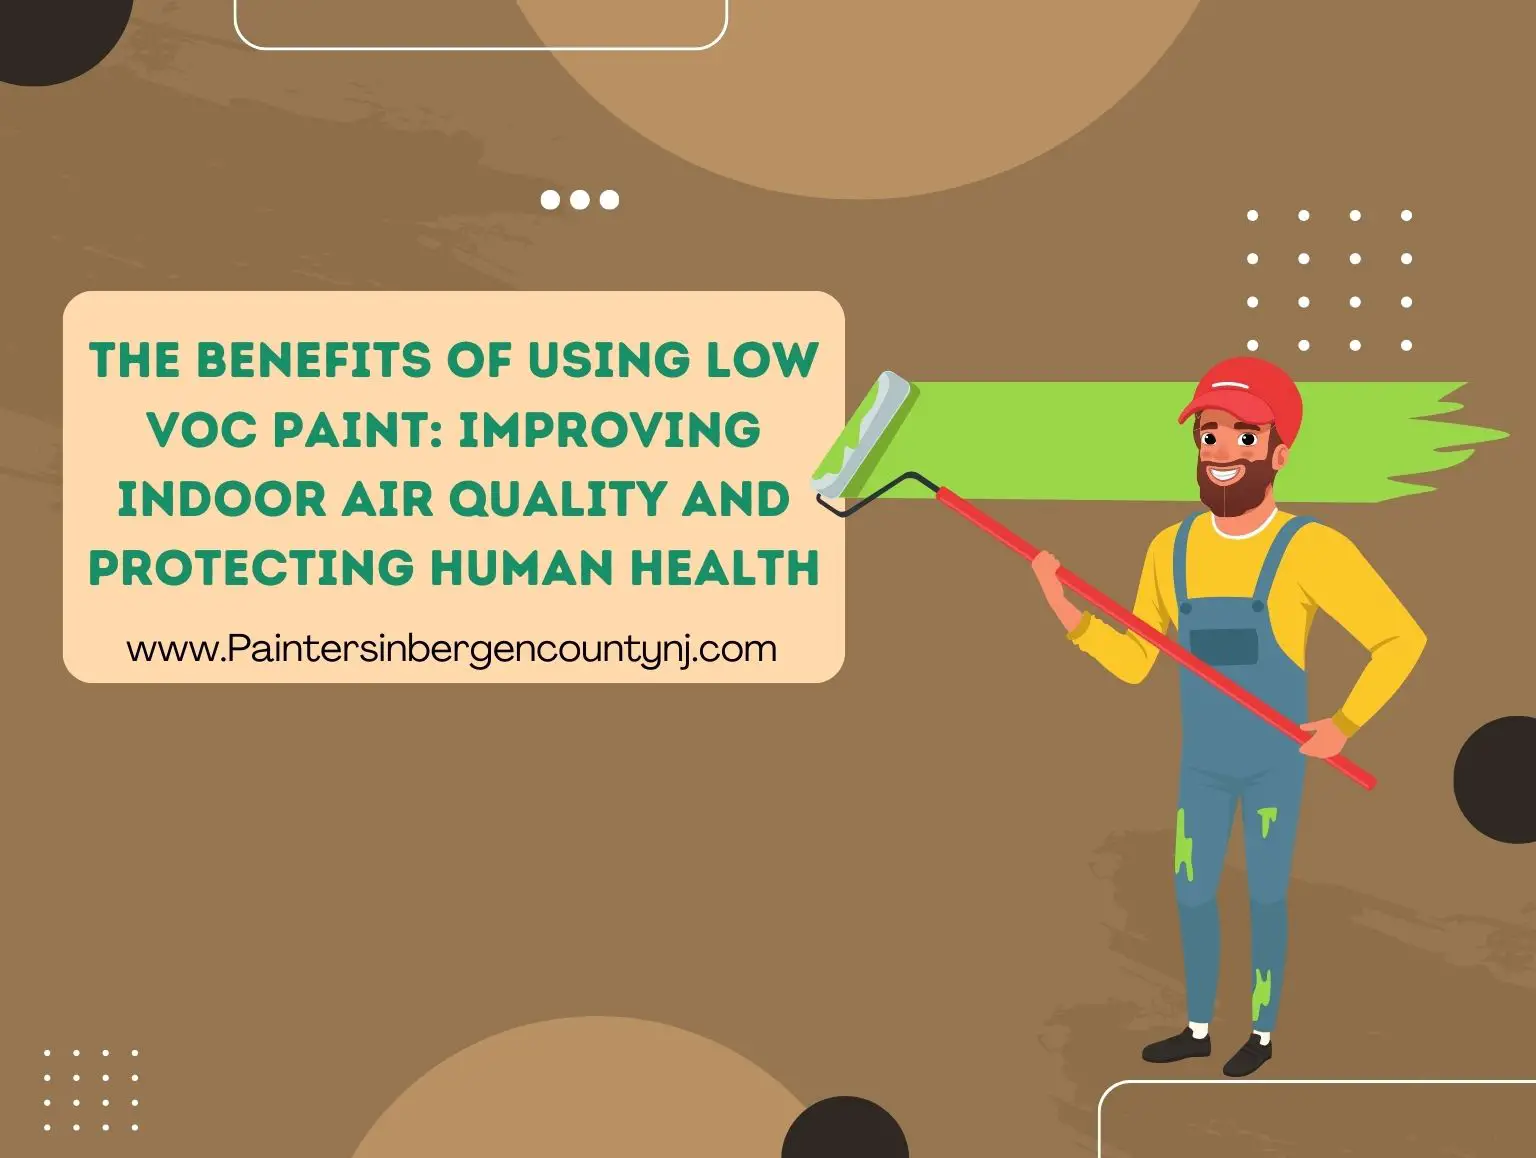 The Benefits of Using Low VOC Paint_ Improving Indoor Air Quality and Protecting Human Health